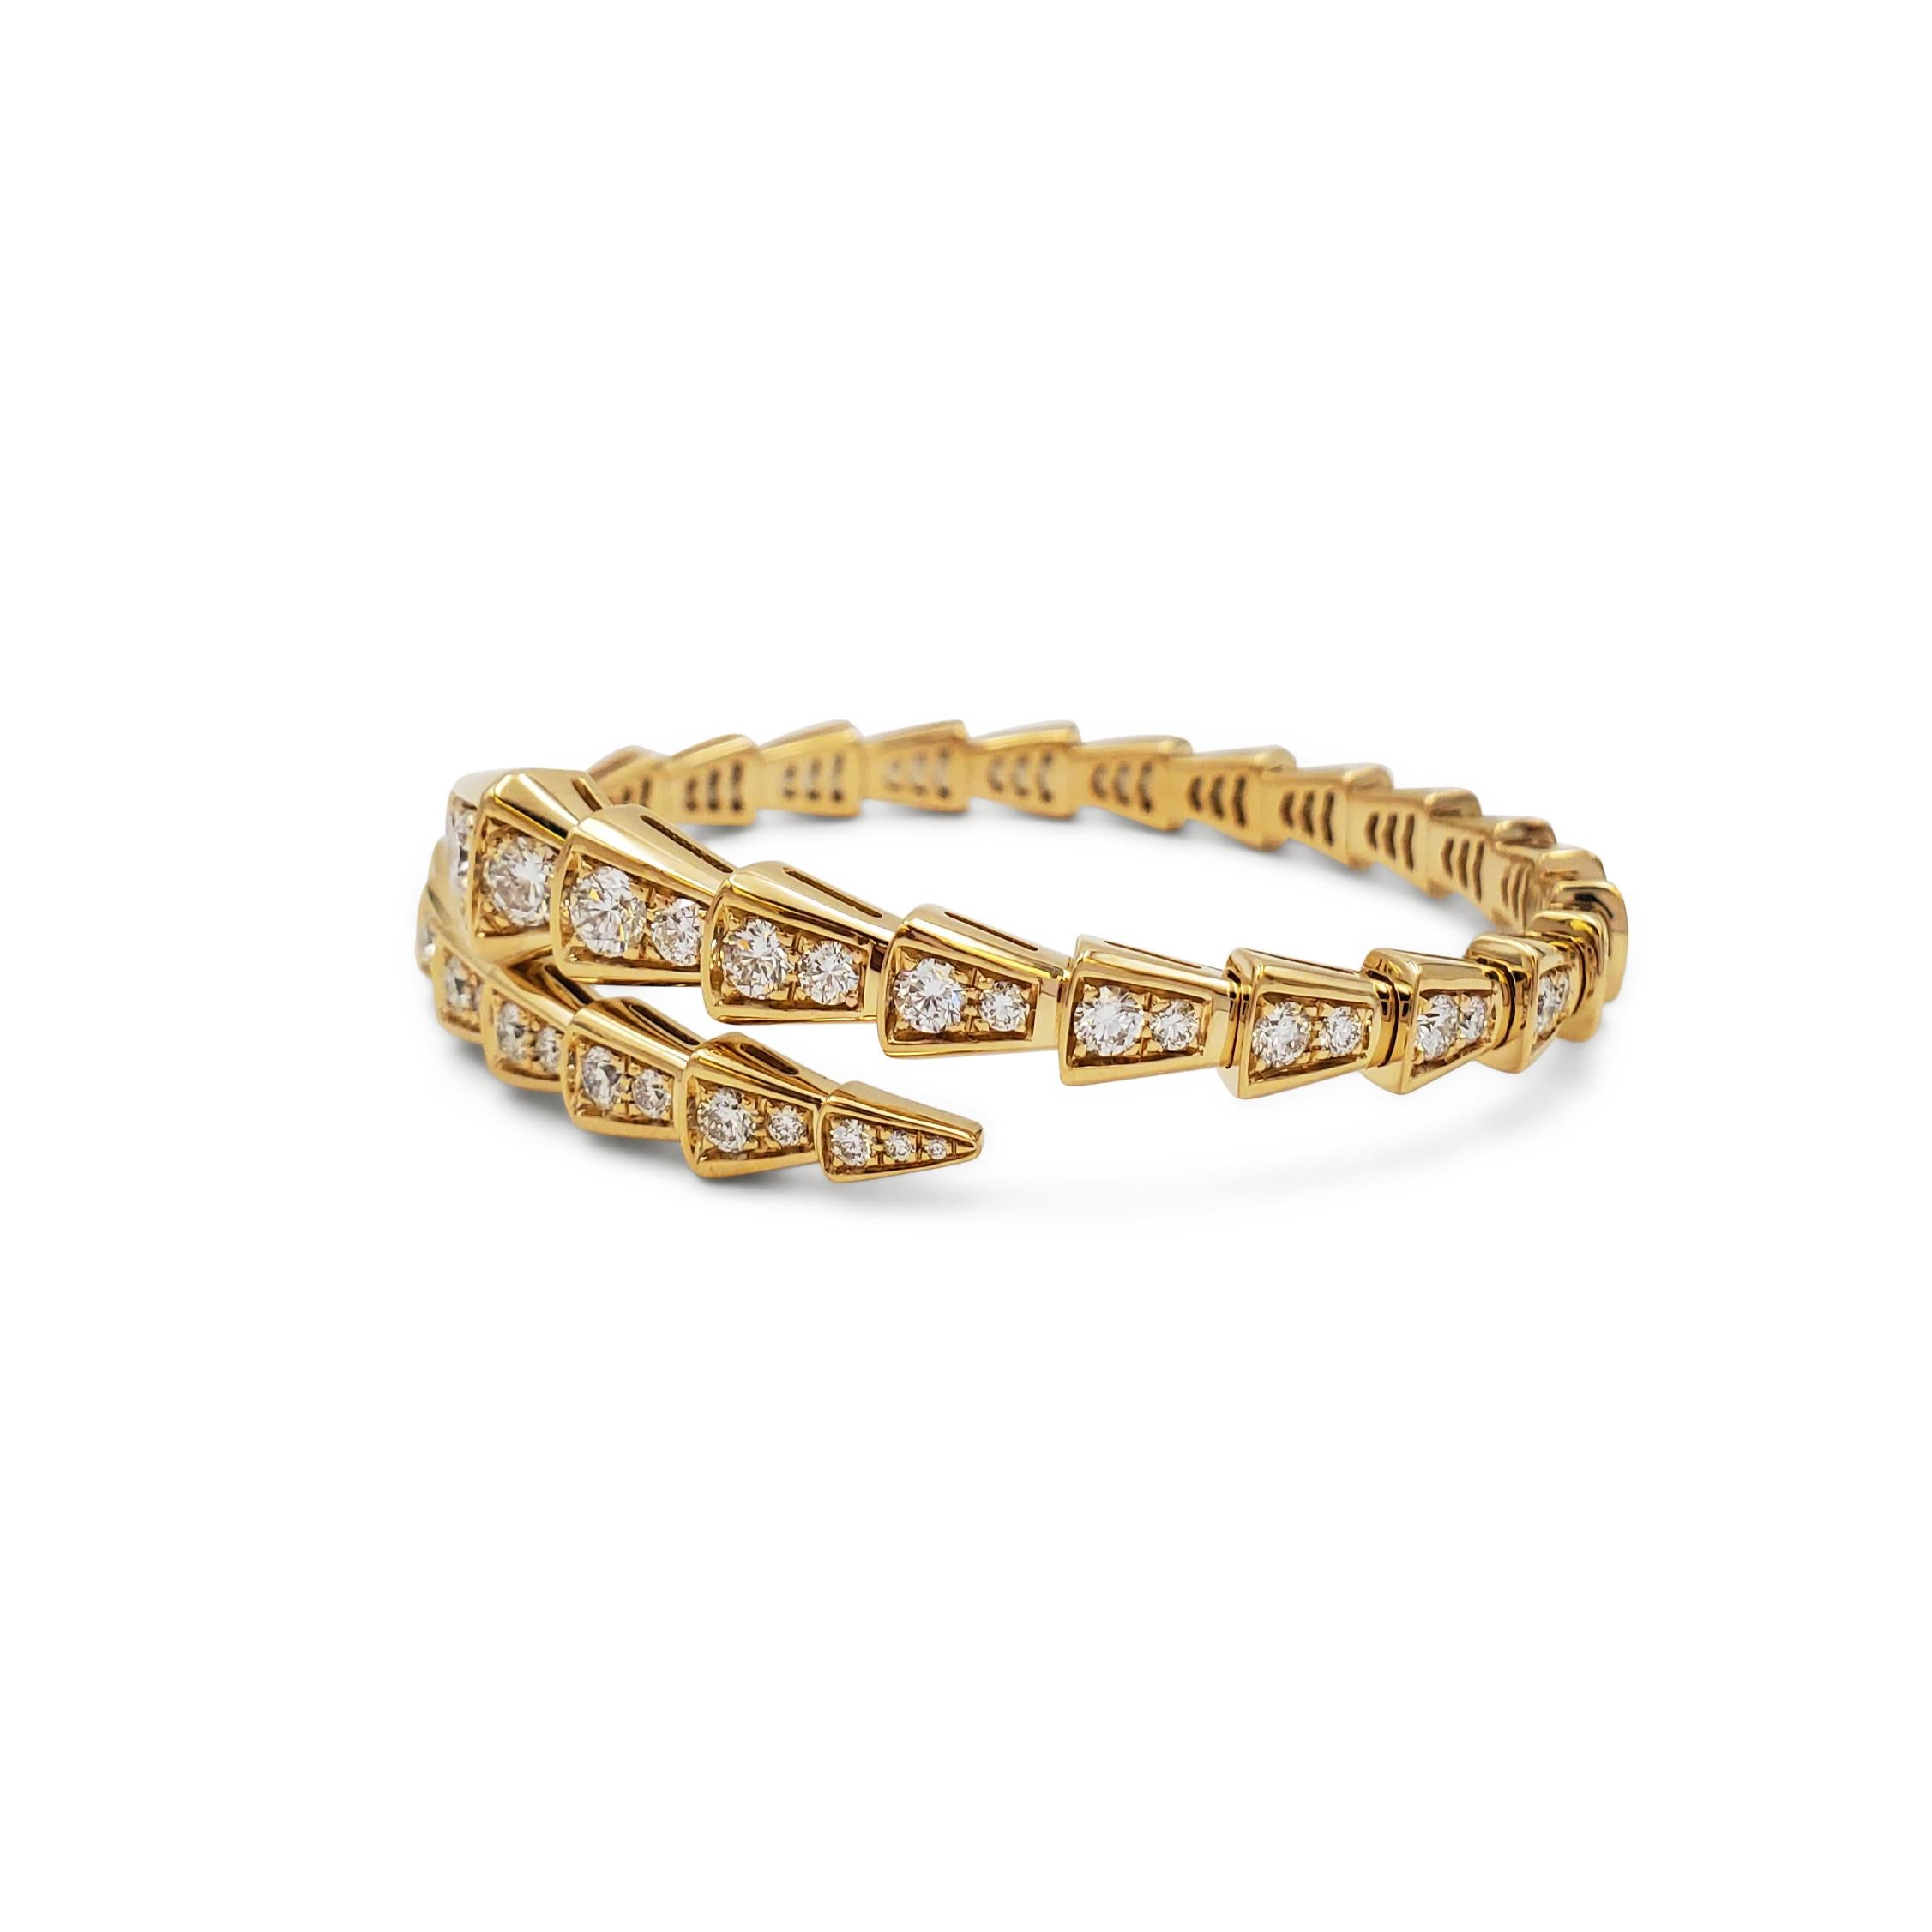 Authentic Bvlgari Serpenti Viper bracelet crafted in 18 karat yellow gold and pavé set with approximately 2.8 carats of sparkling round brilliant cut diamonds.  Size S (15cm).  Signed Bvlgari, made in Italy, Au750, with serial number and hallmark. 